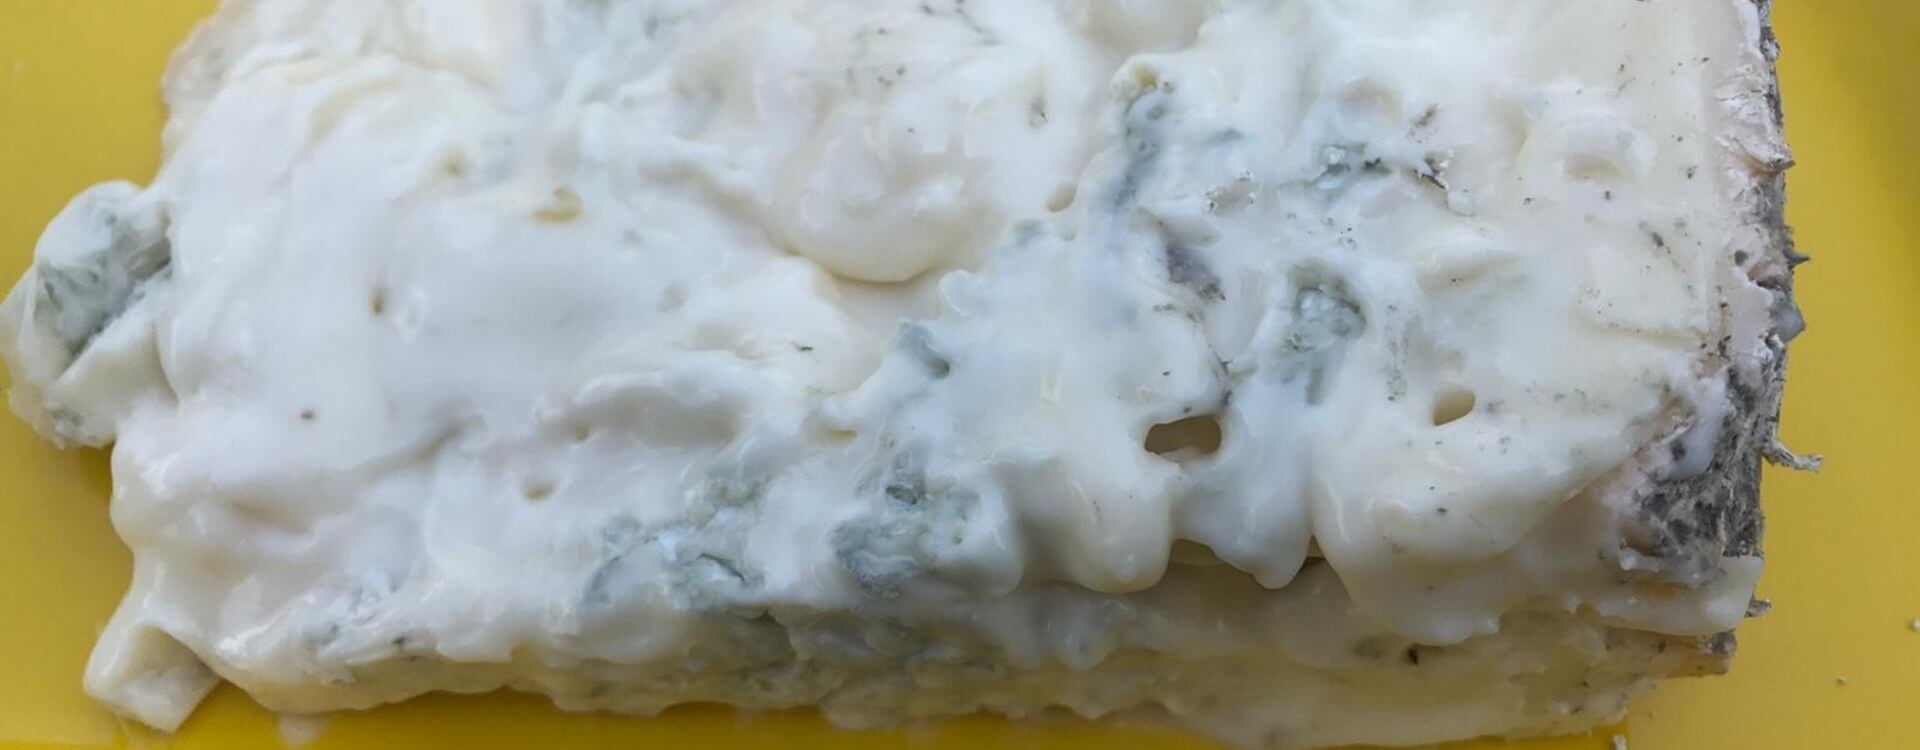 Gorgonzola: everything about the most famous cheese from Lombardy